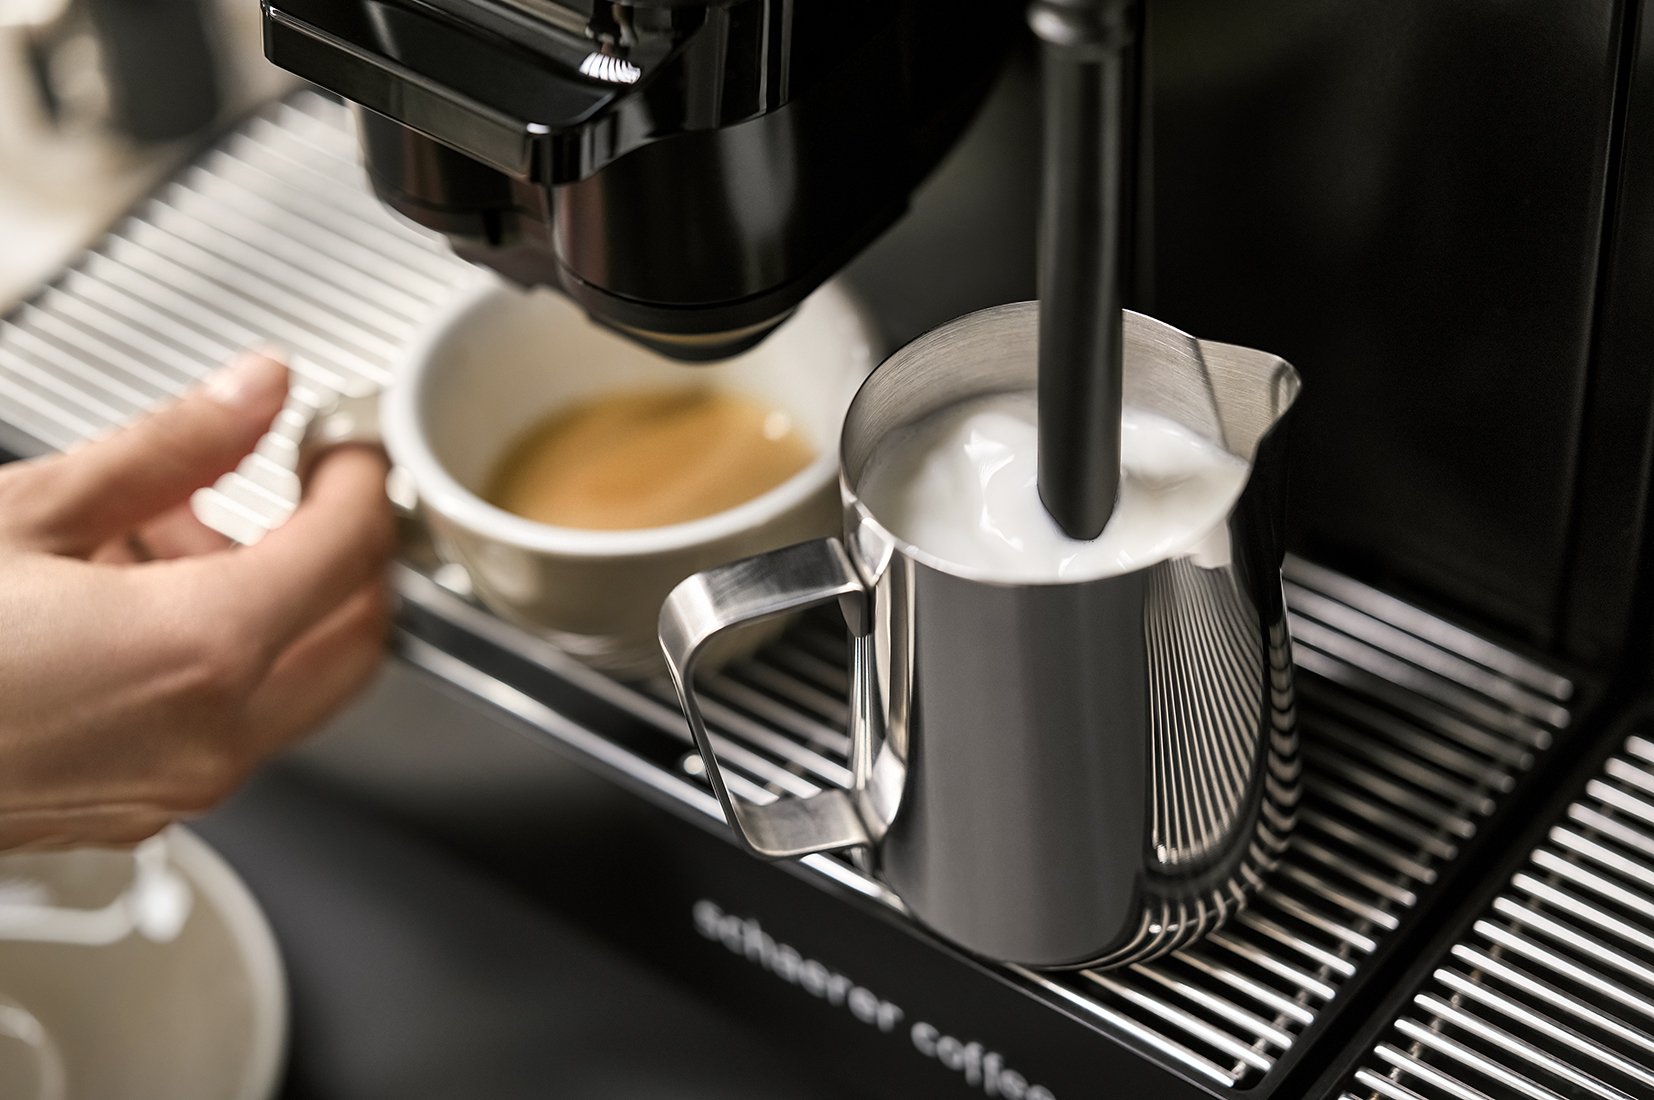 Schaerer_Coffee_Machines_Soul_2-step_Shooting_Image_Ambient_Milk-Frothing_Espresso-Brewing_RGB_low-res.jpg